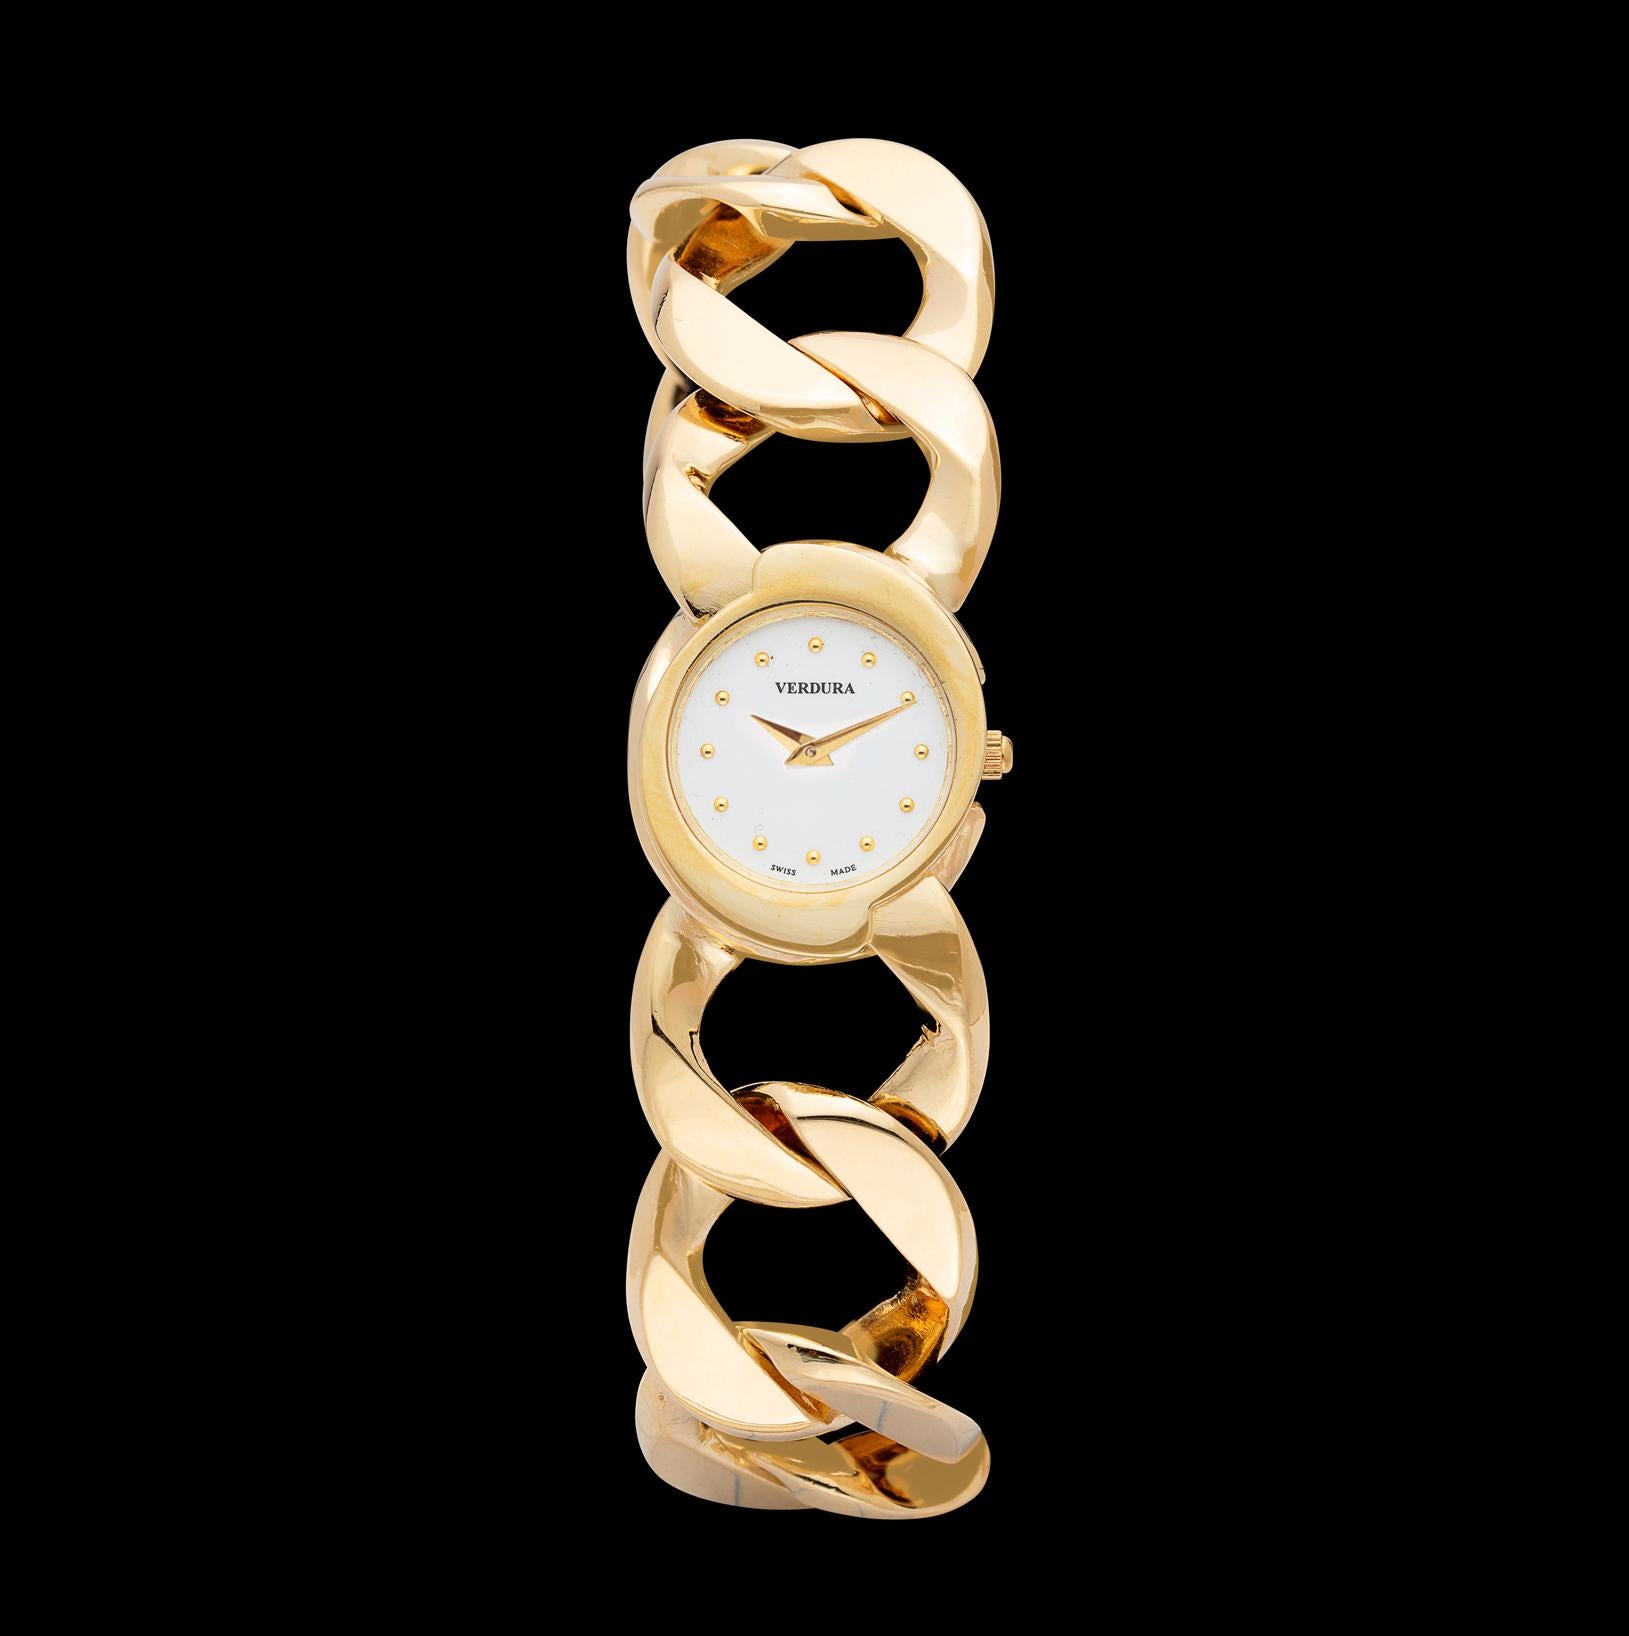 Own this iconic piece of jewelry by Verdura! Made famous by Greta Garbo in 1941, the 18k gold curb-link bracelet quartz watch has a white dial, dot numerals, sapphire crystal, and two hand movement.  With 13 links, it measures approximately 8